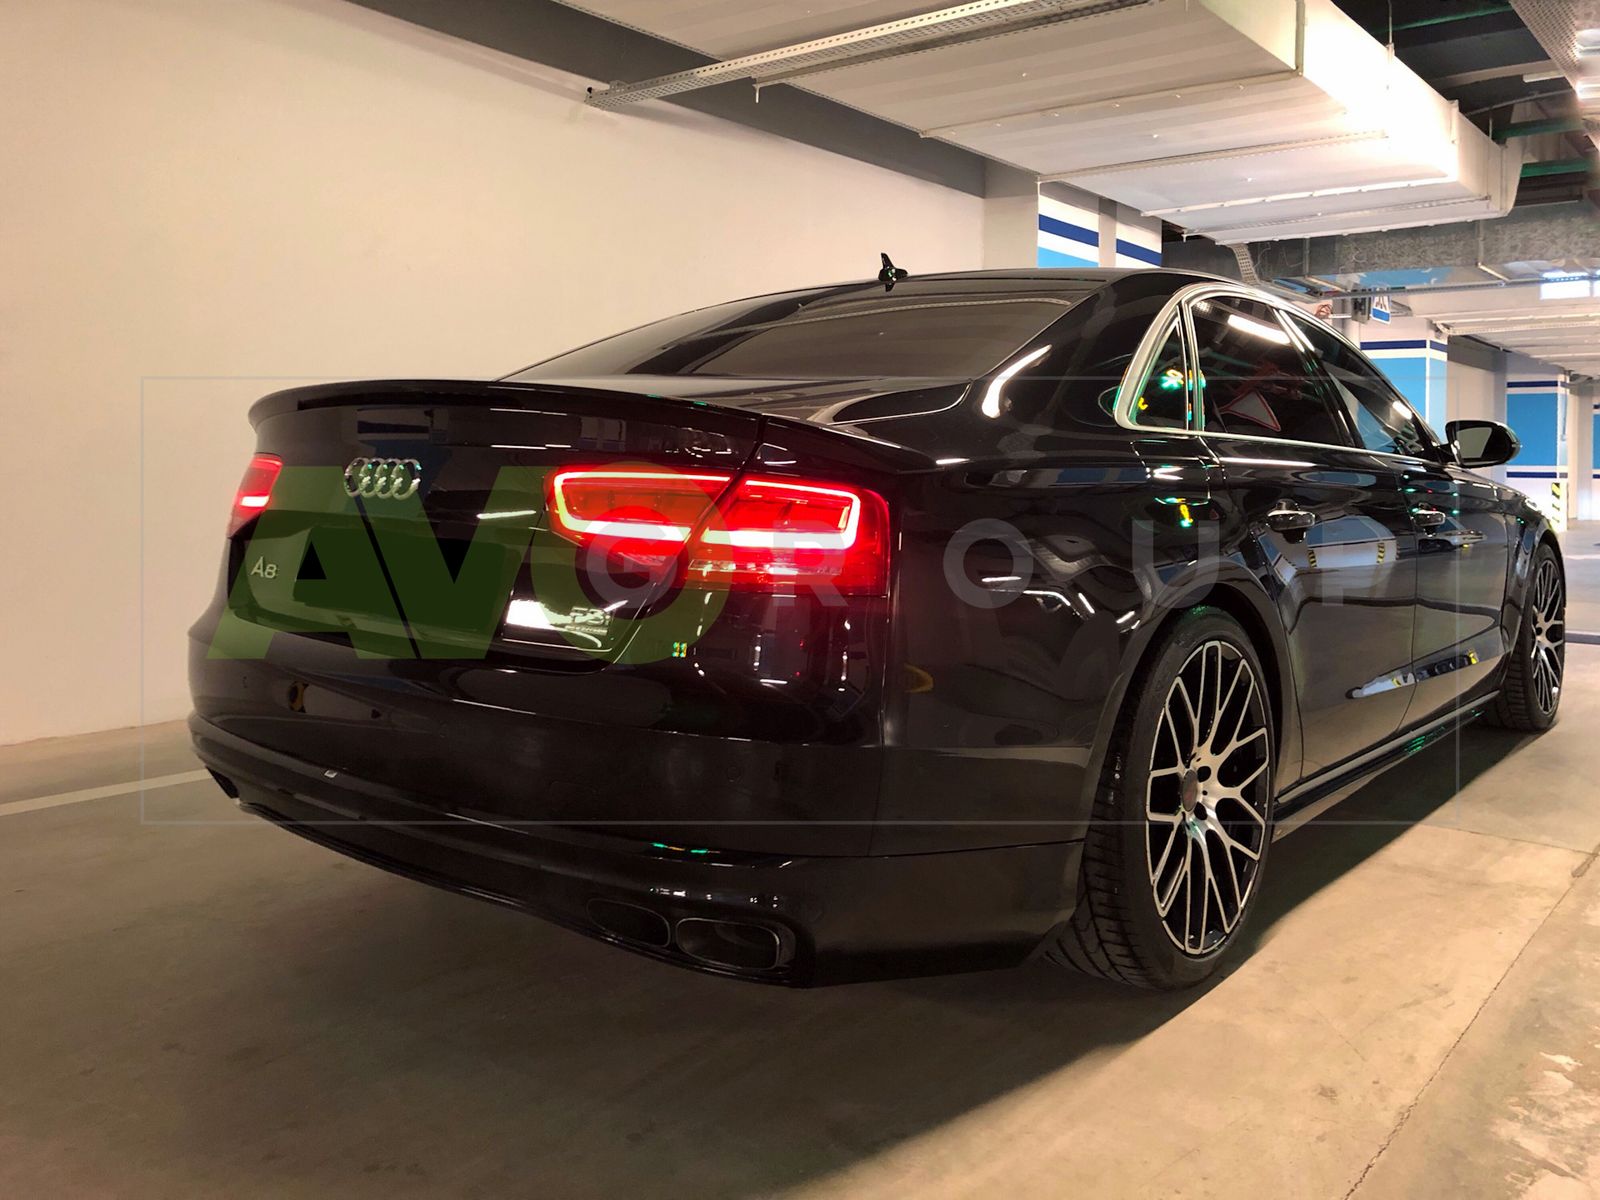 A Style Trunk boot spoiler for AUDI A8 S8 2010-2018